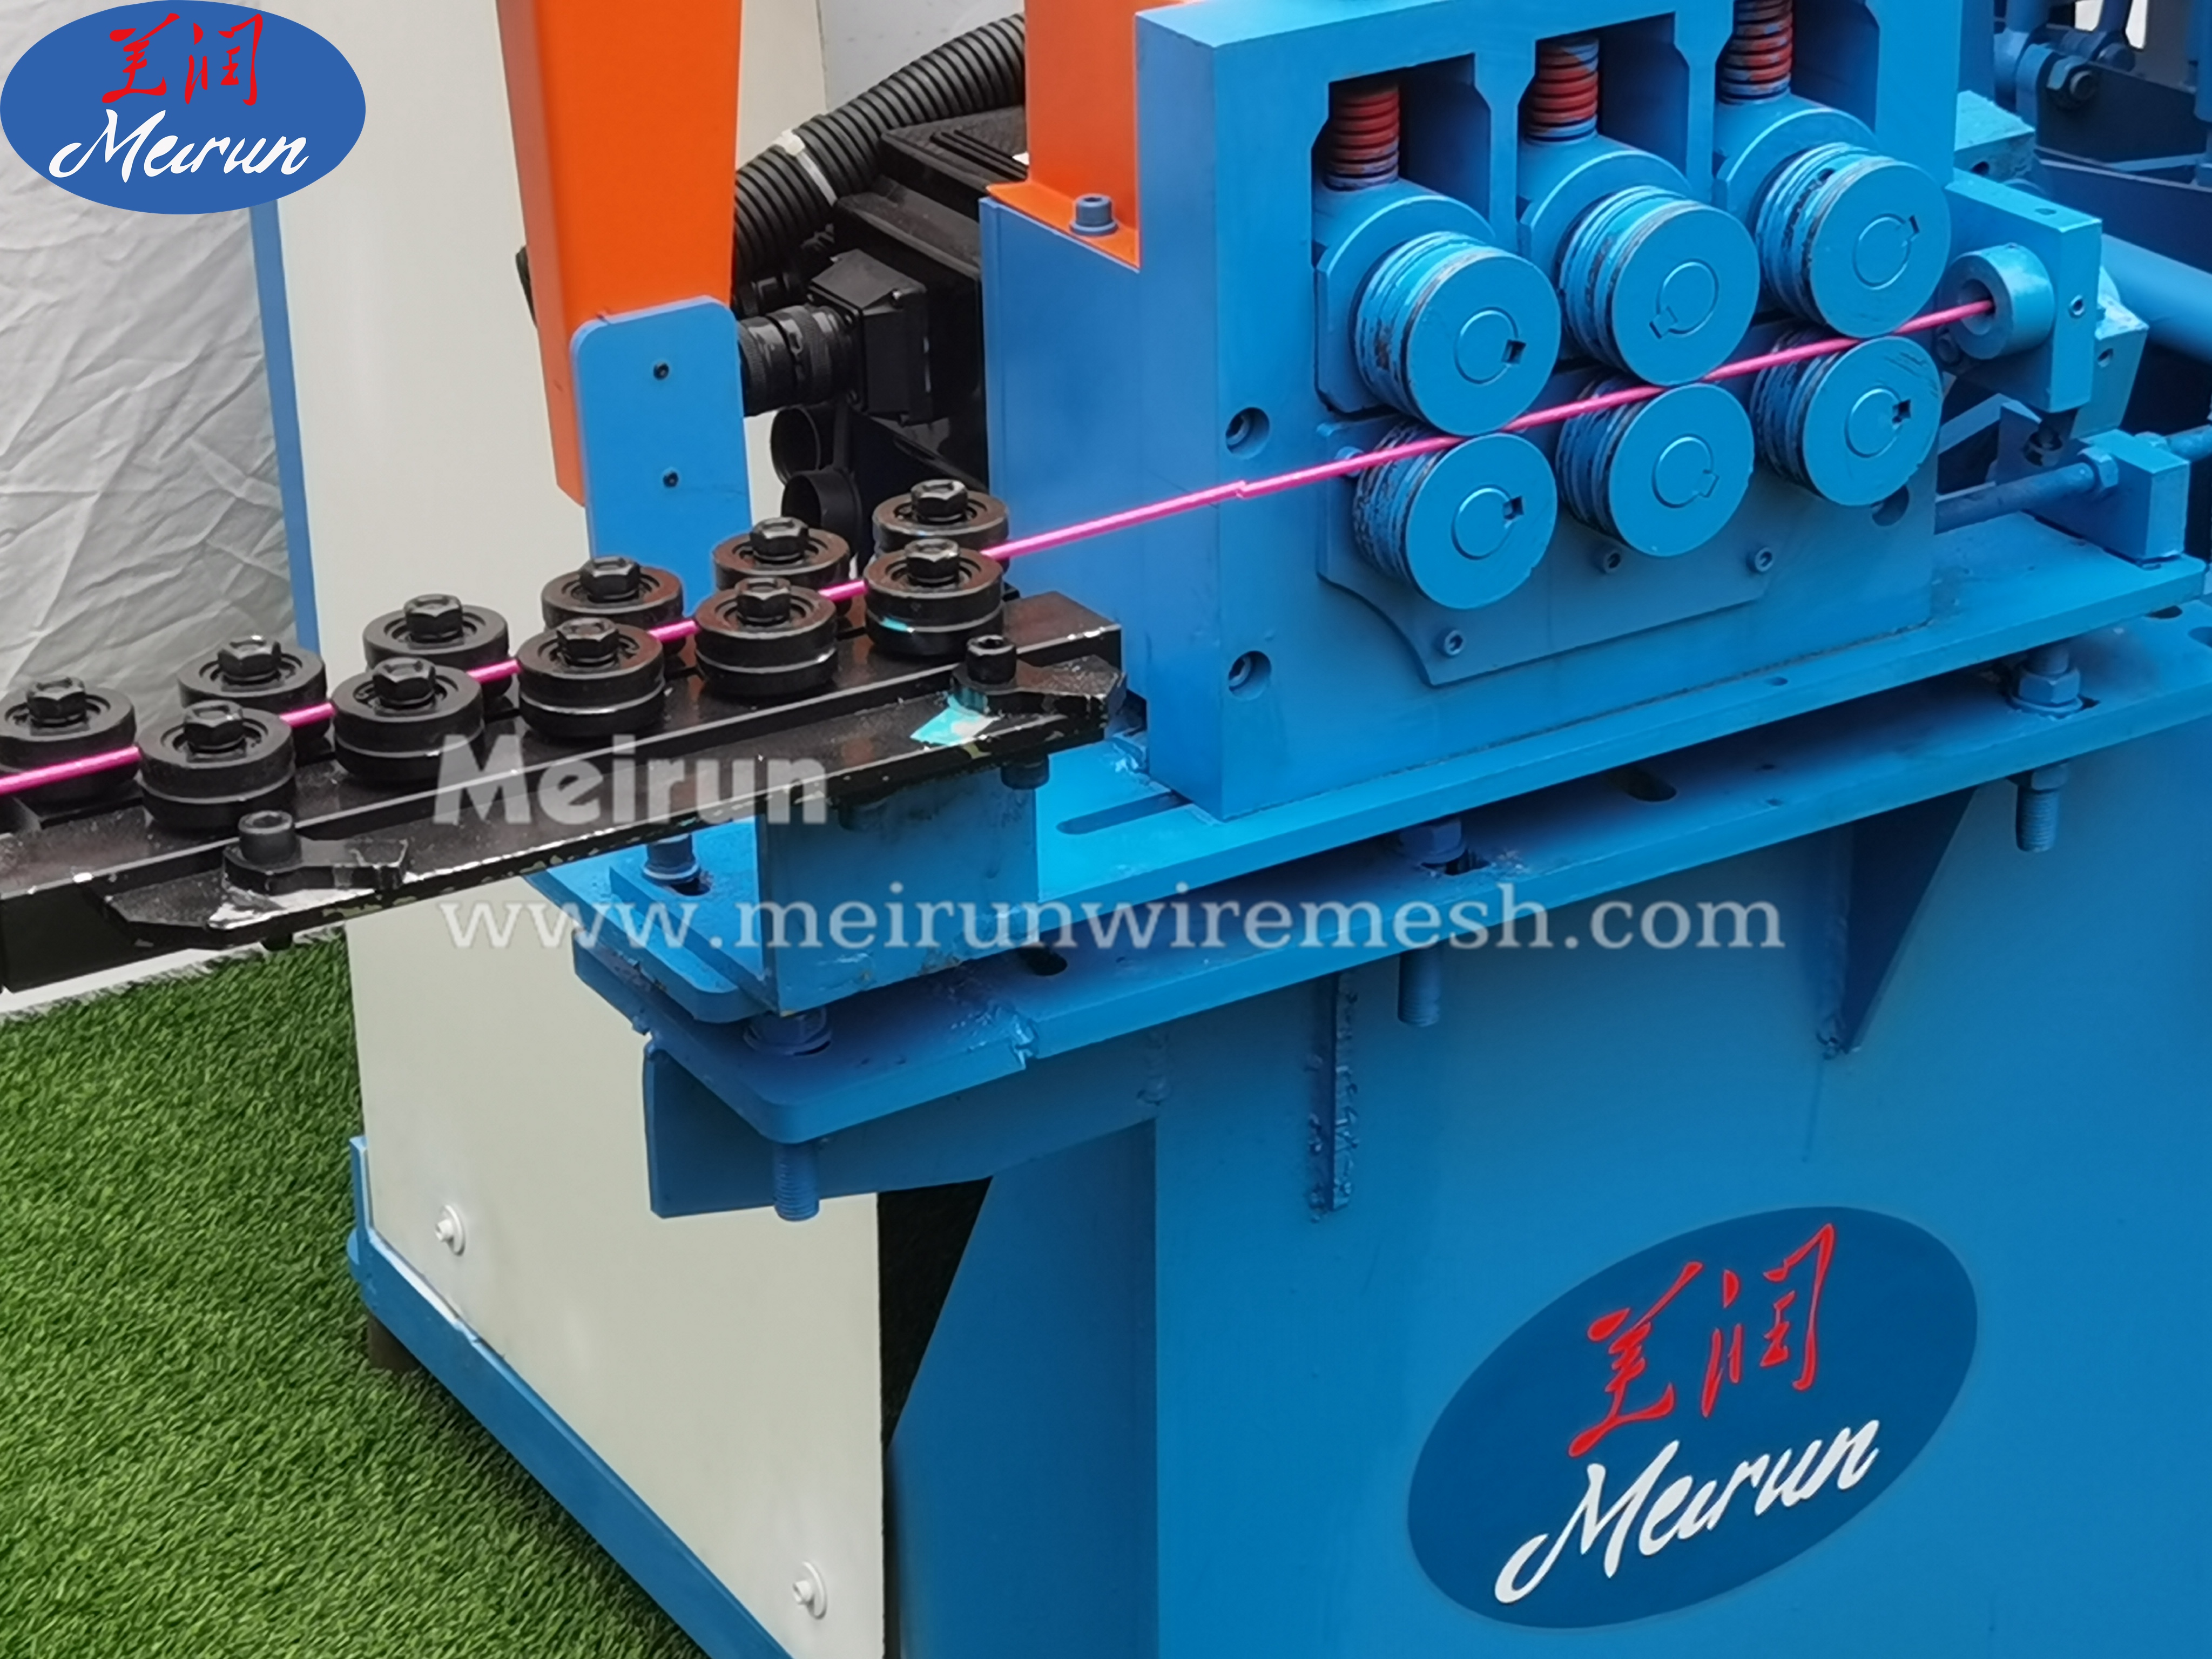 Automatic Clothes Hanger Making Machine Garment Hanger Making Machine Pvc Wire Machine